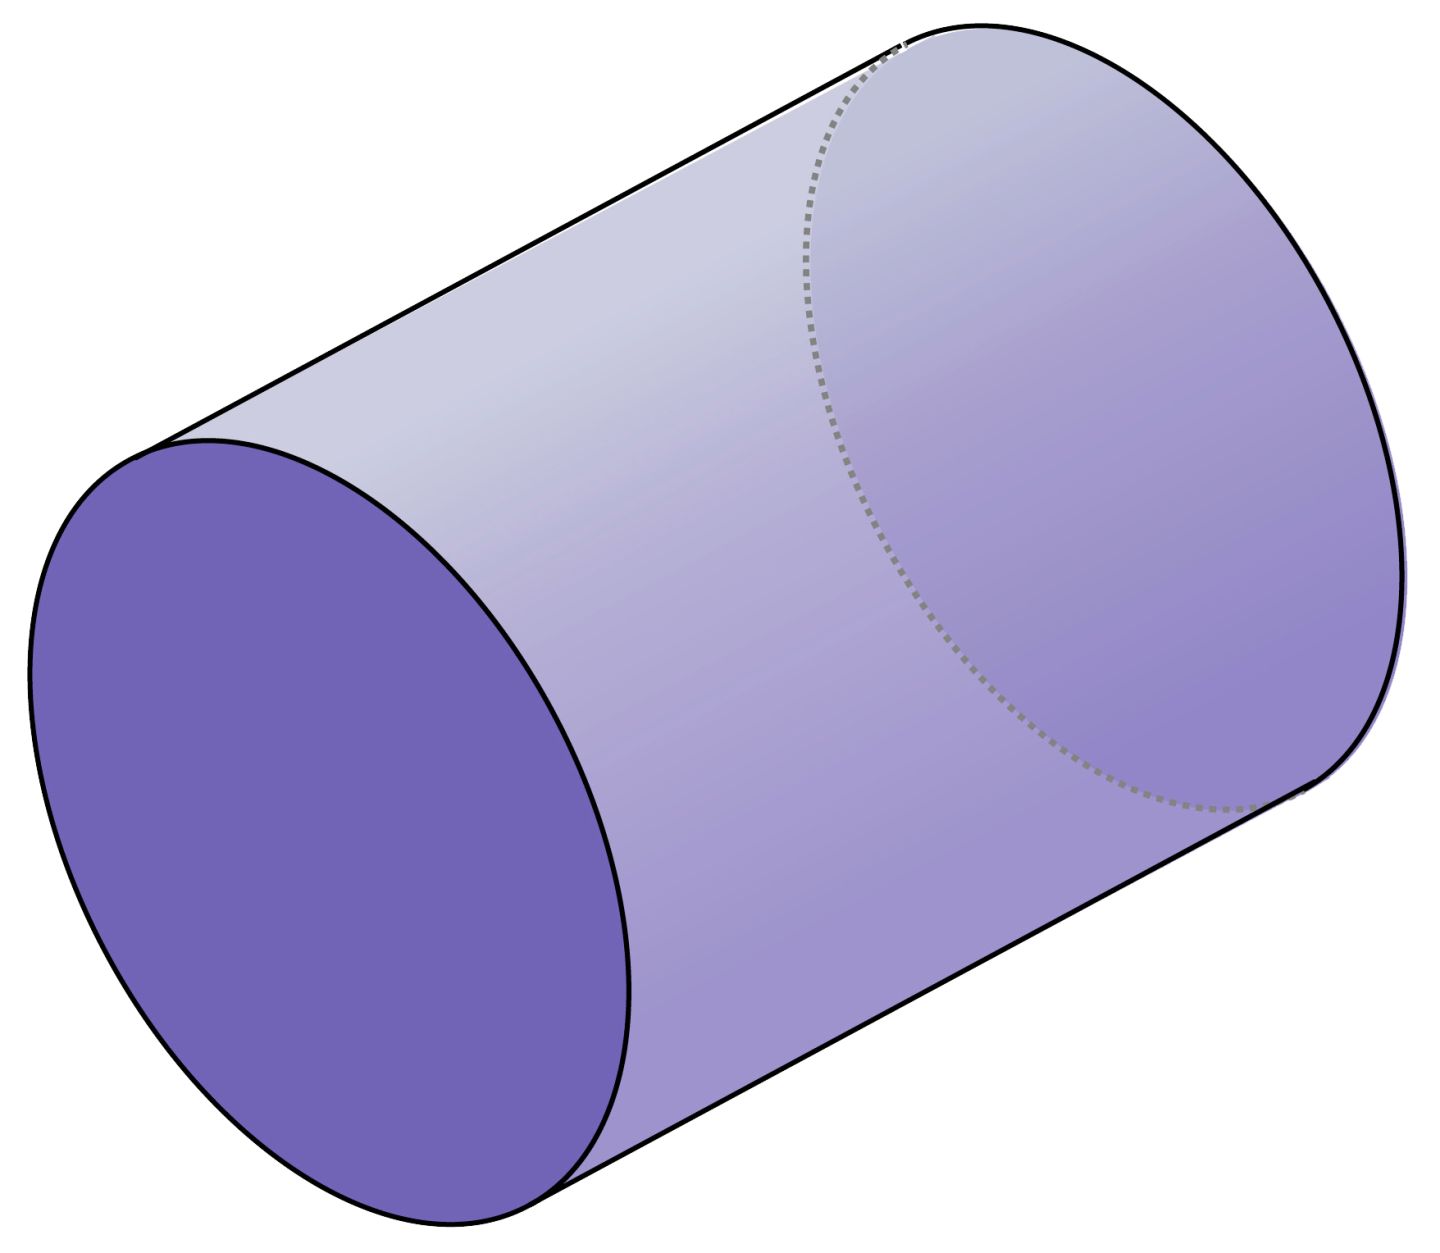 Discover The Secret To Finding The Height Of A Cylinder With Just The Volume And Radius!